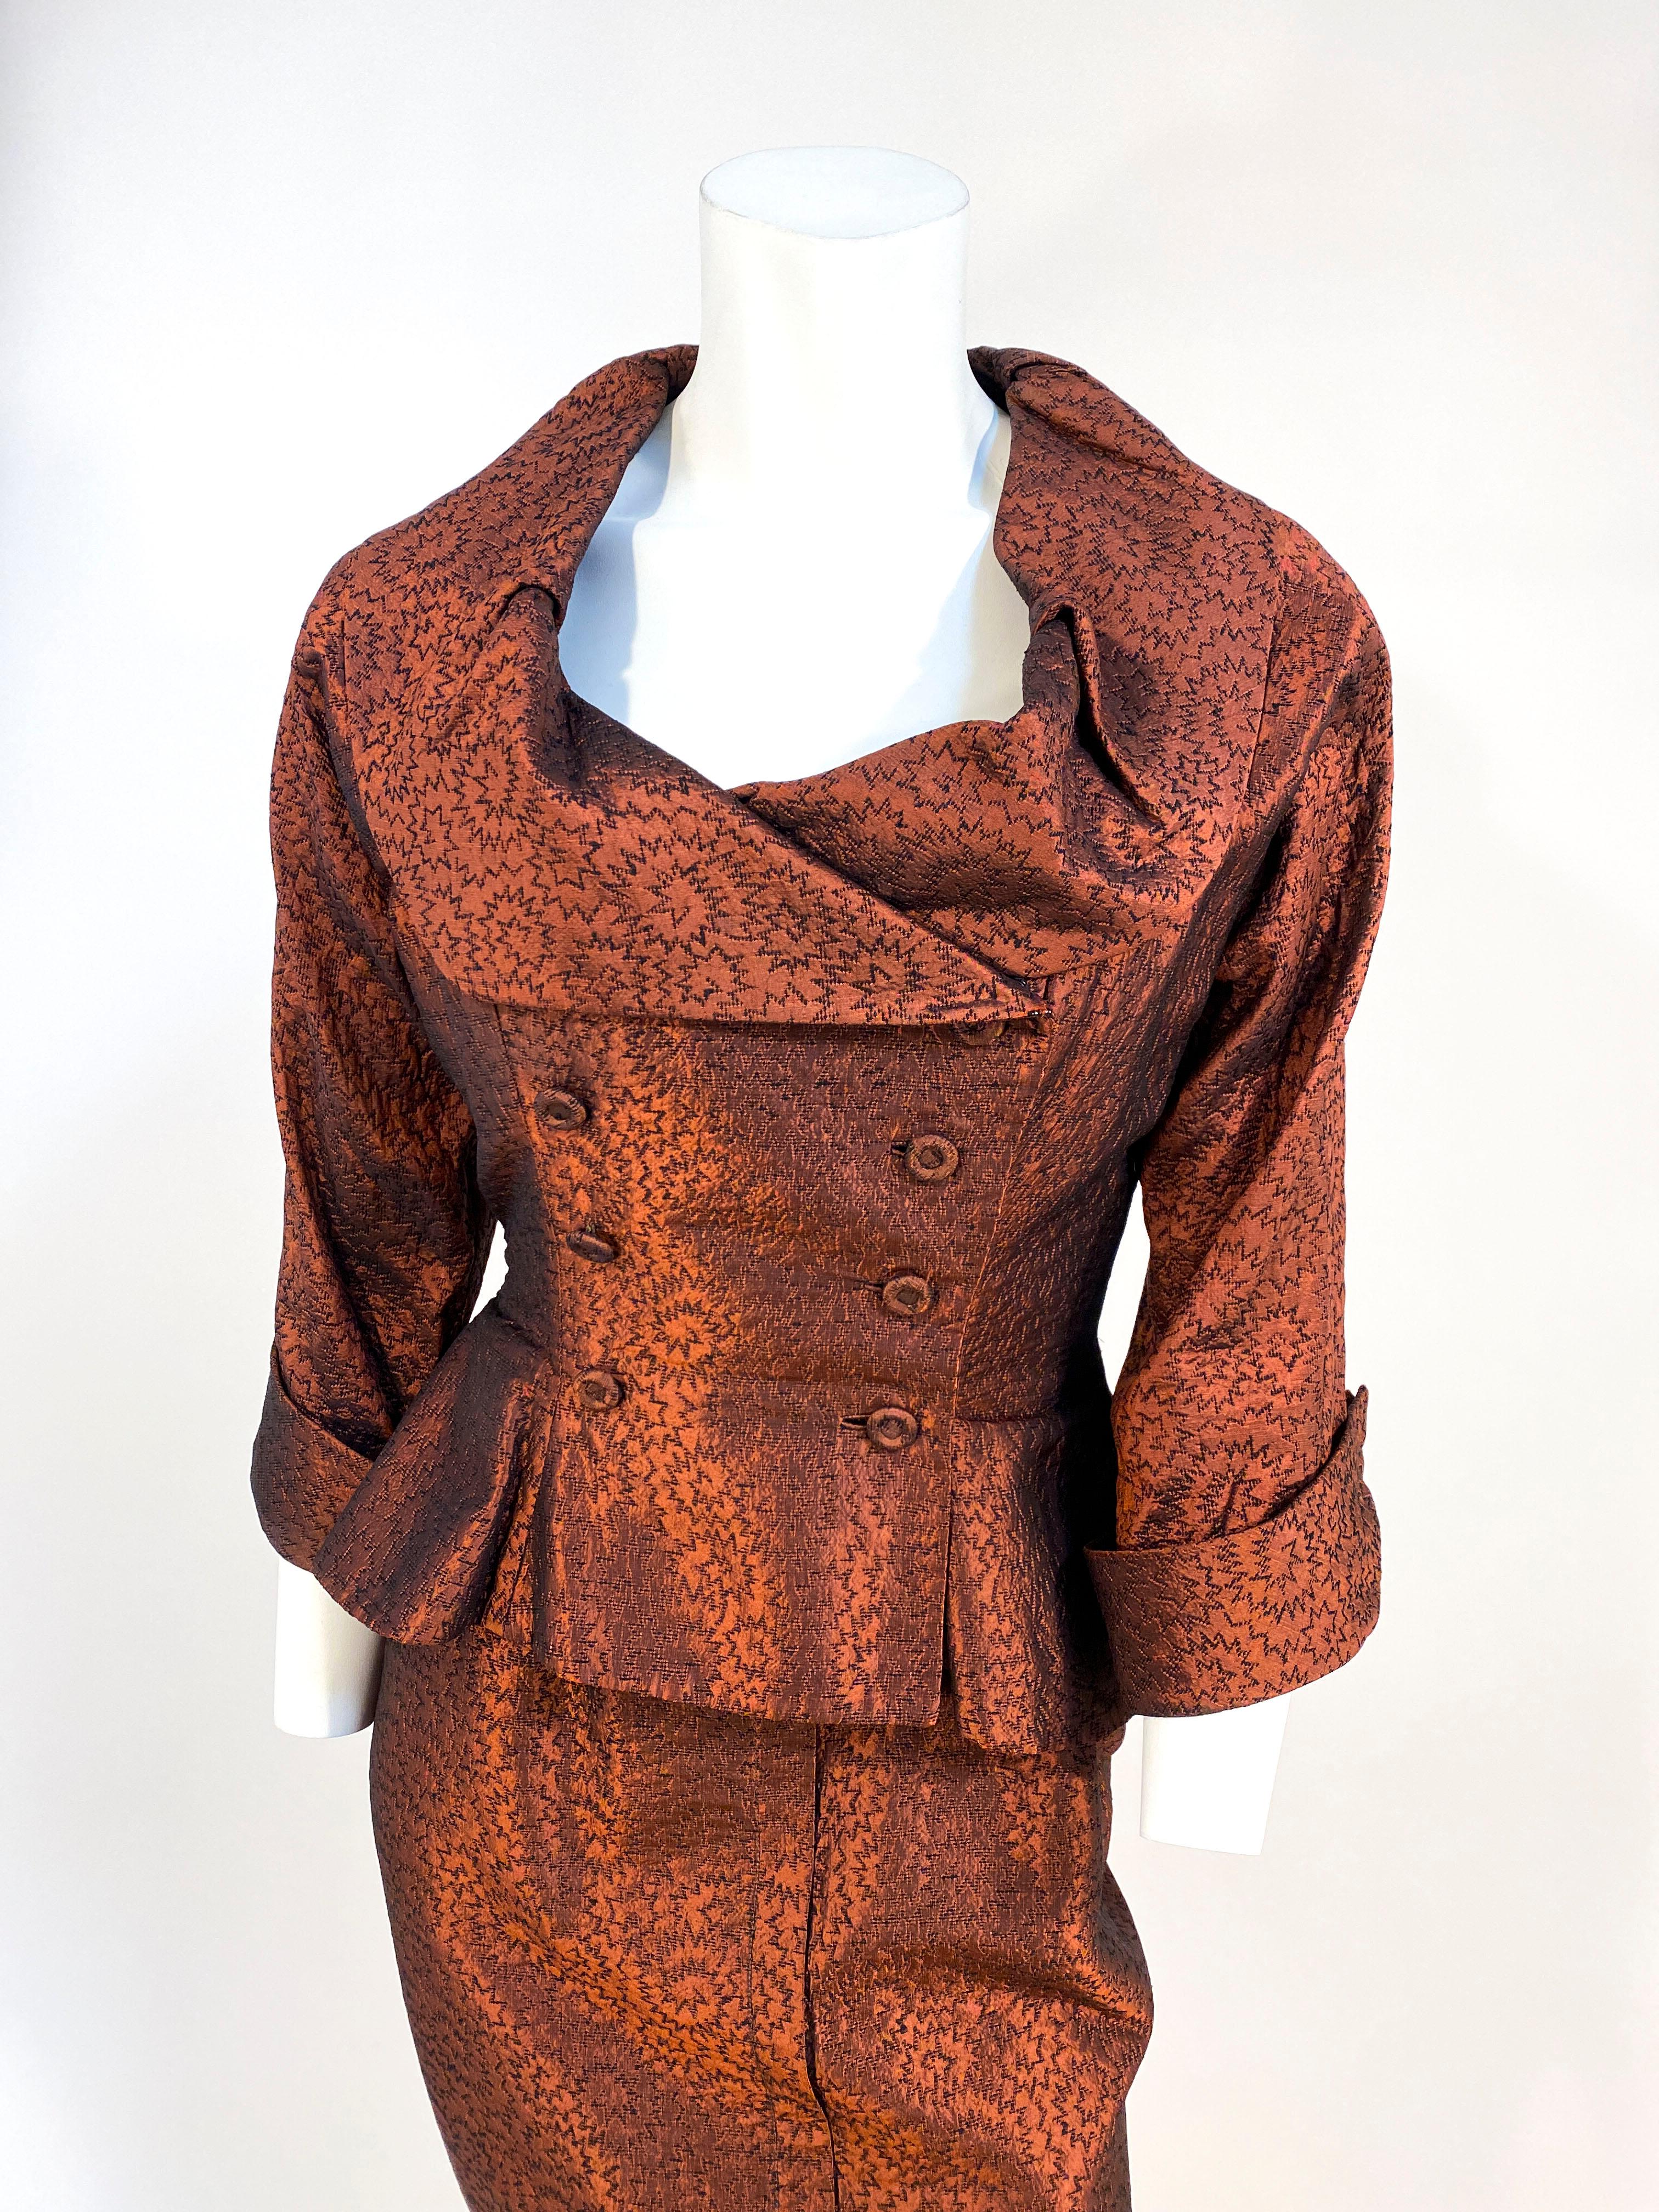 1950s Ceil Chapman metallic rust-colored Cocktail Suit made of an atomic-patterned silk brocade. The Dress has spaghetti straps, a fitted torso, pipped was it line, side metal zip closure, faux kick pleat, and a hook & eye strap. The jacket is